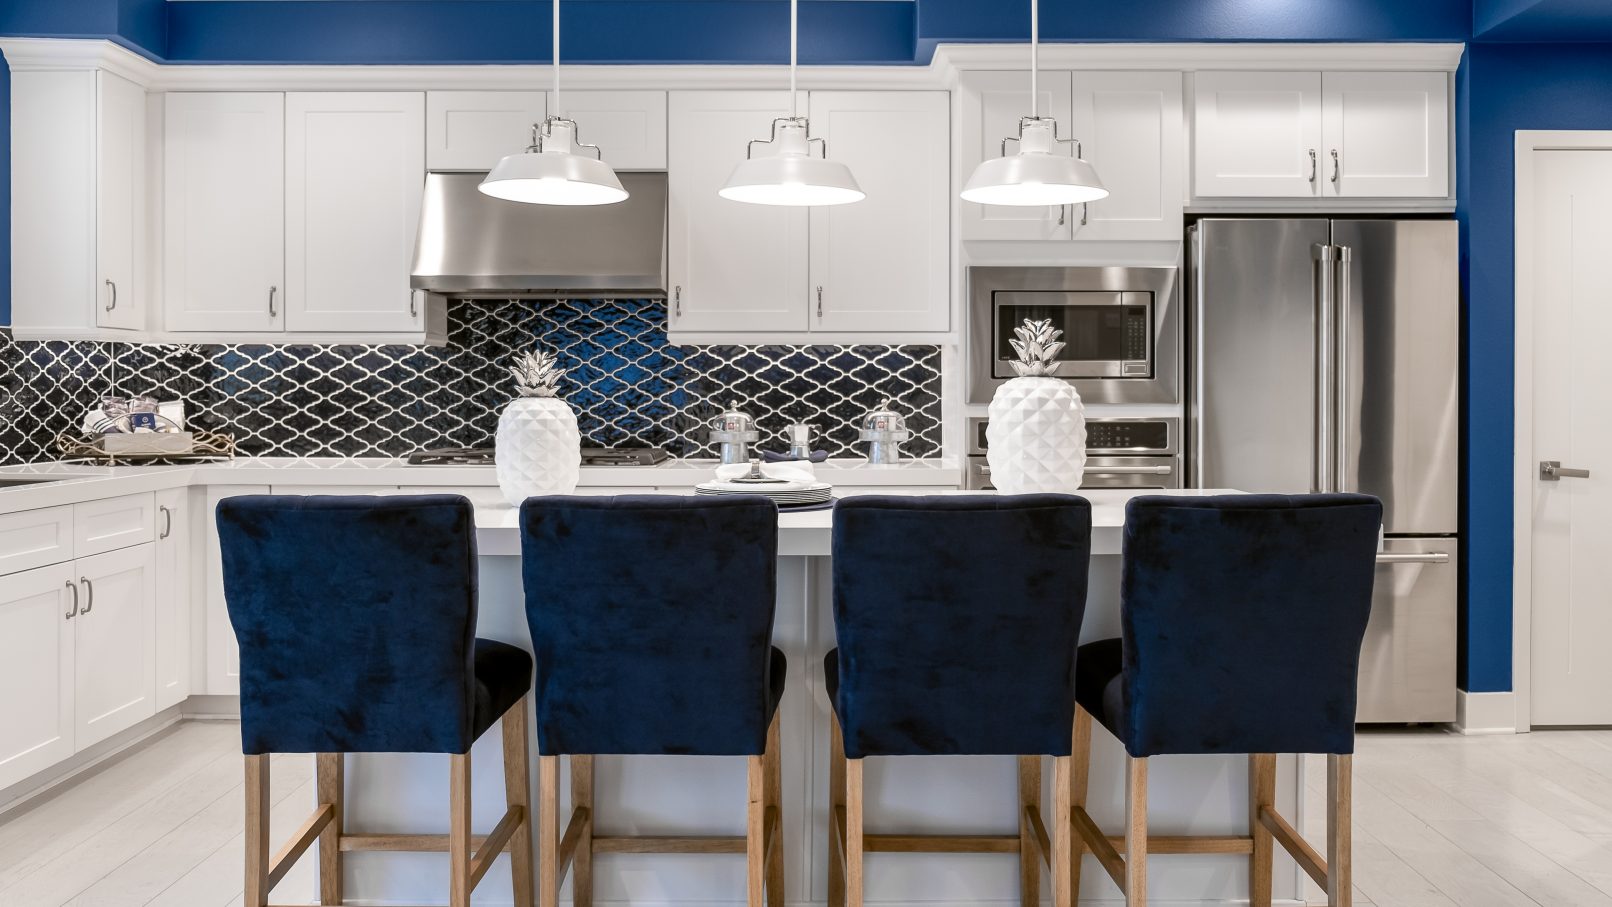 Orange County Interior Design Photography Irvine Blue Kitchen with Blue Barstools White Cabinets and Stainless Steel Appliances and Pendant Lamps with Pineapple Decor on Kitchen Island Counter